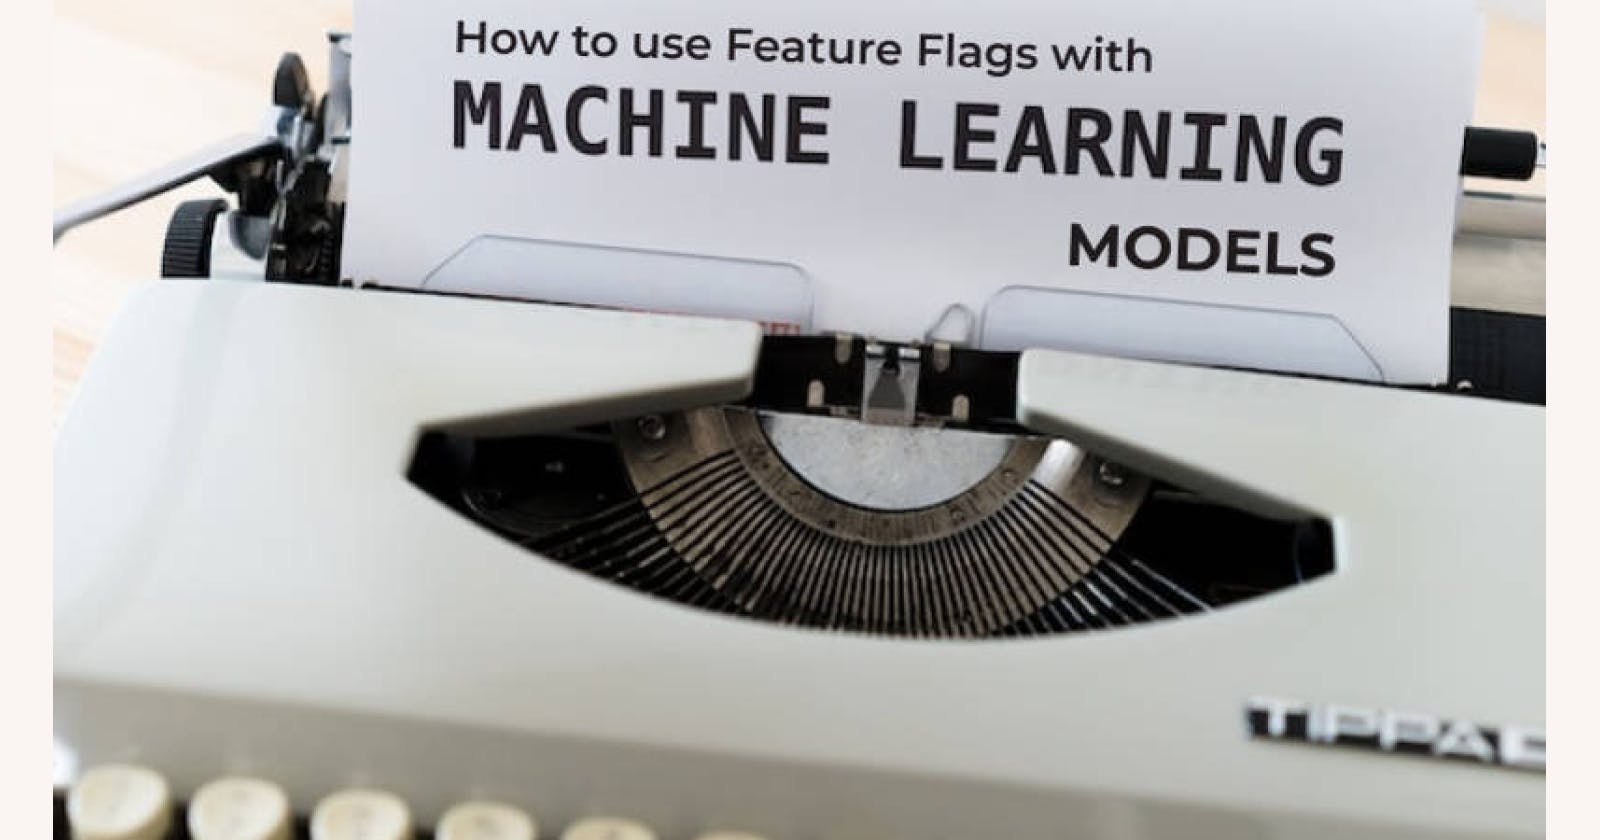 Using Feature Flags with Machine Learning Models